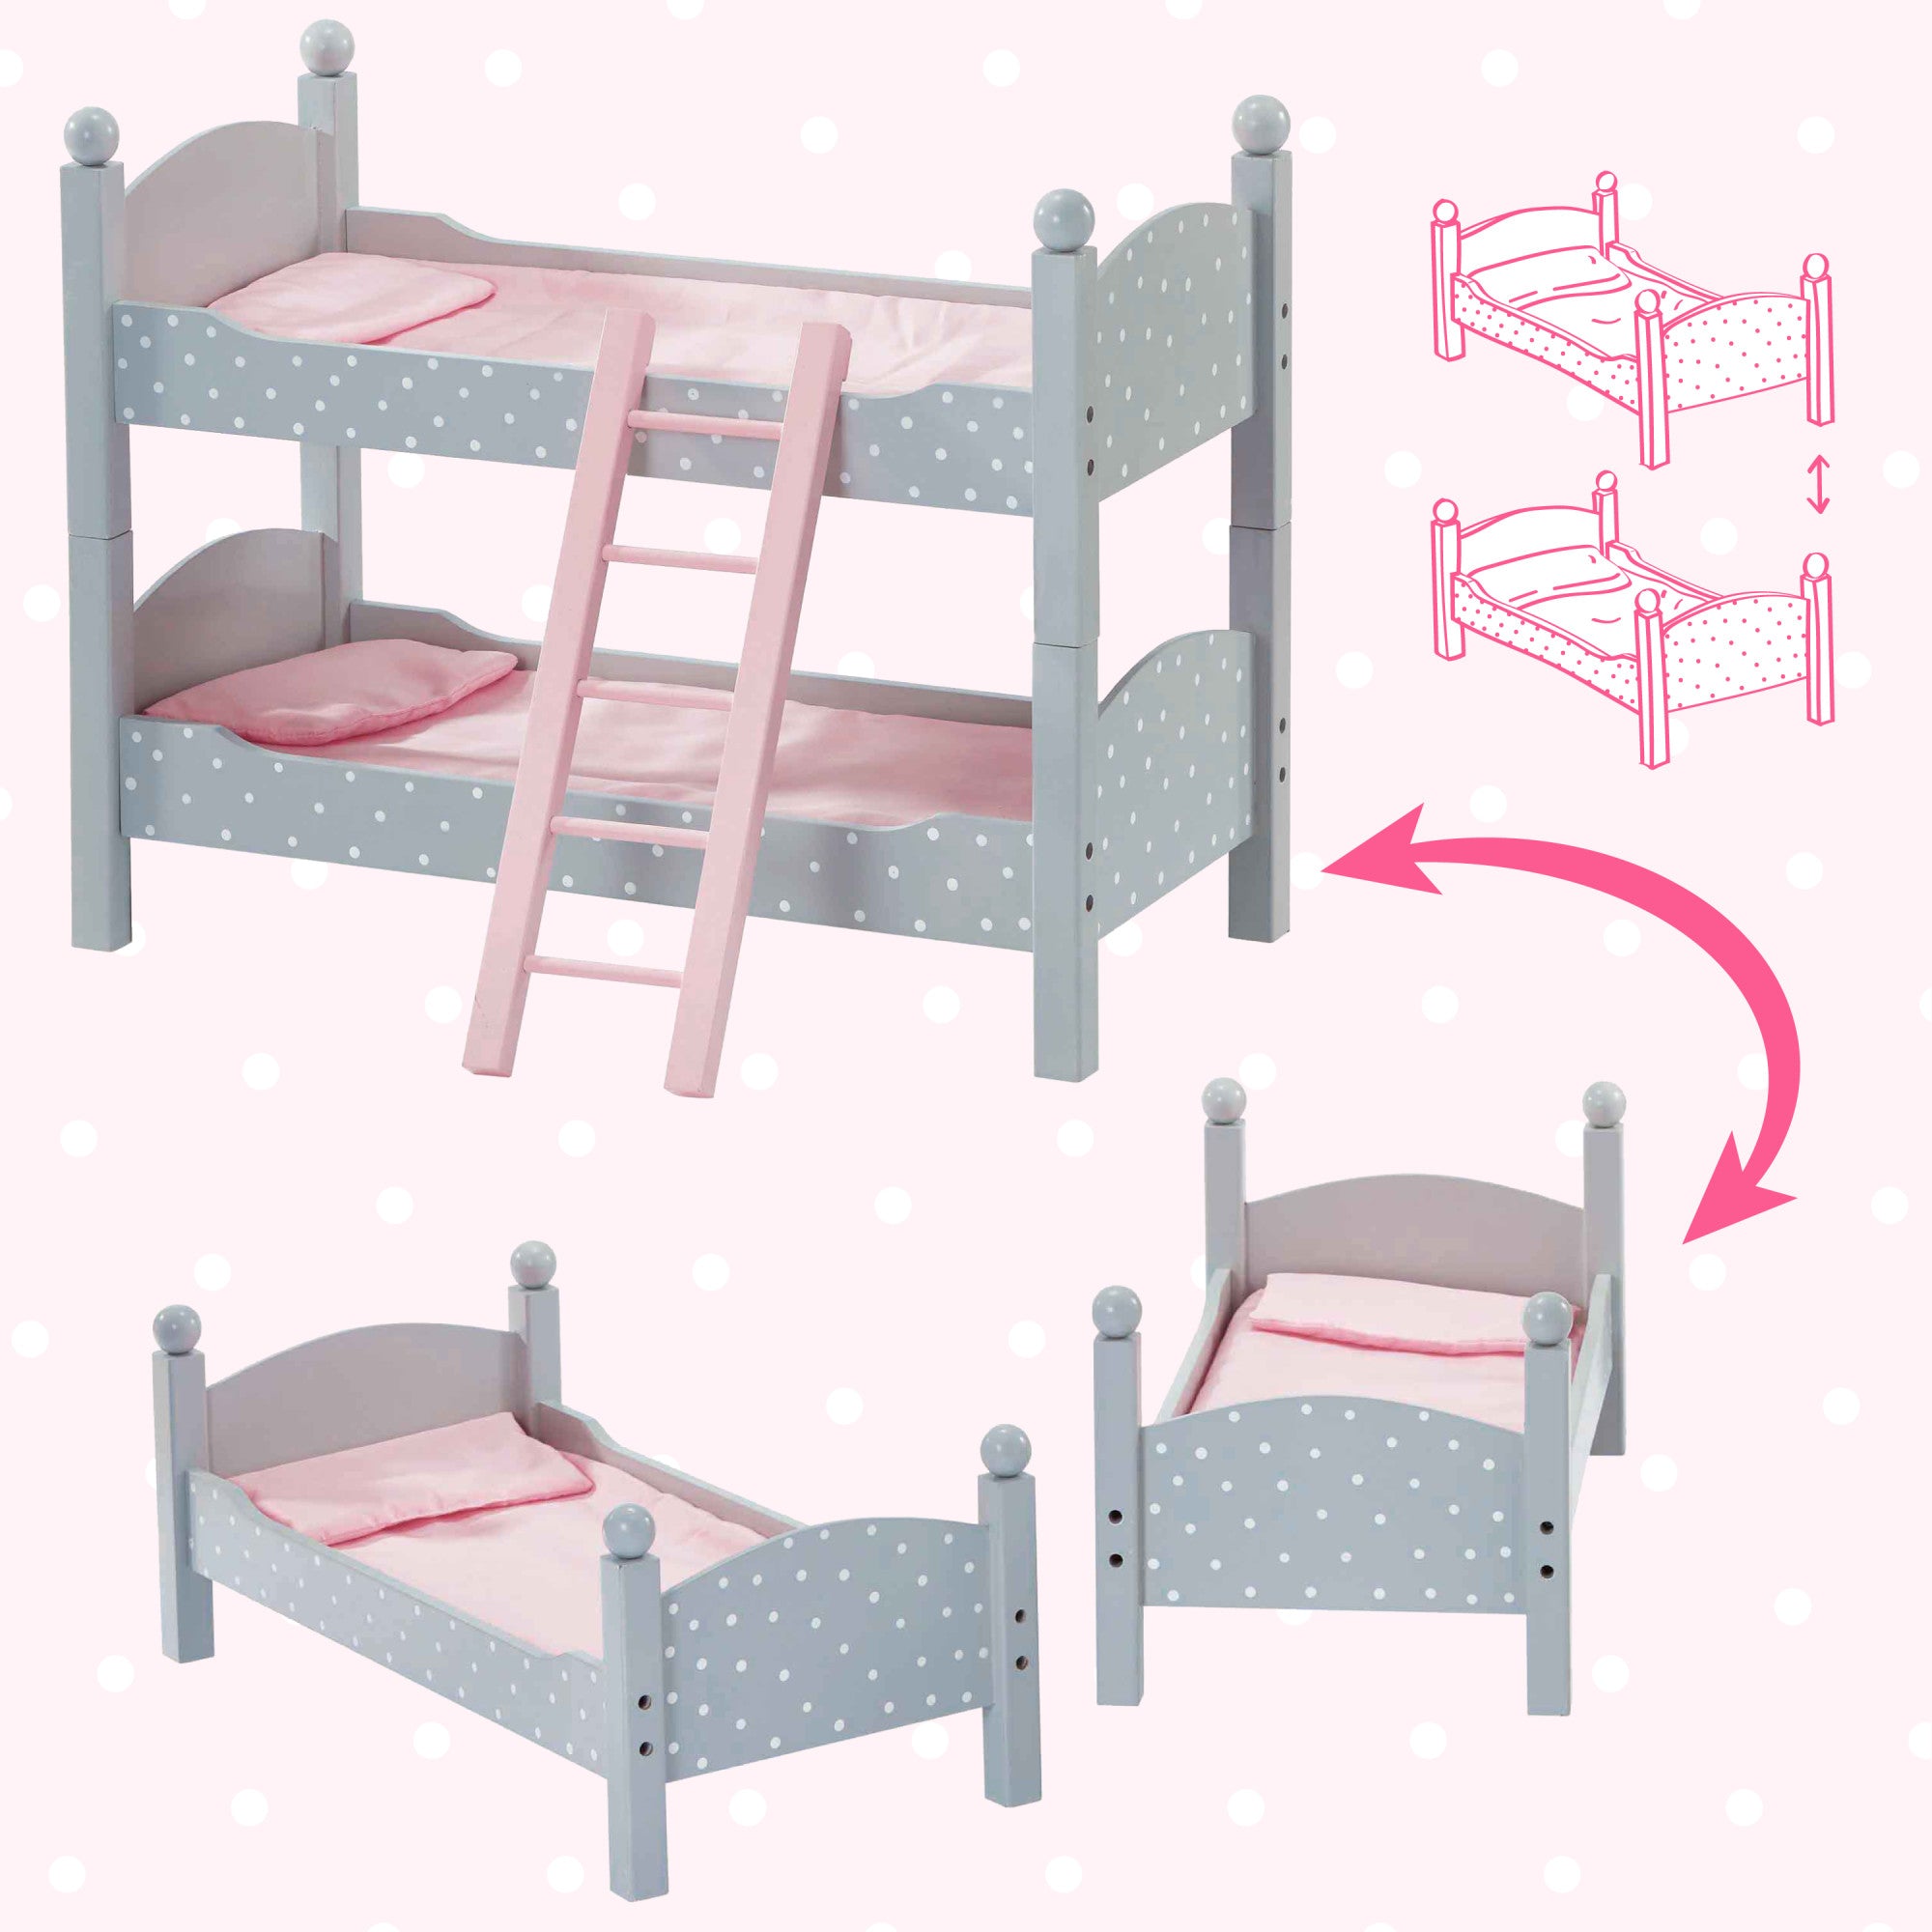 Olivia's Little World Polka Dots Princess Double Bunk Bed for 18" Dolls, Gray